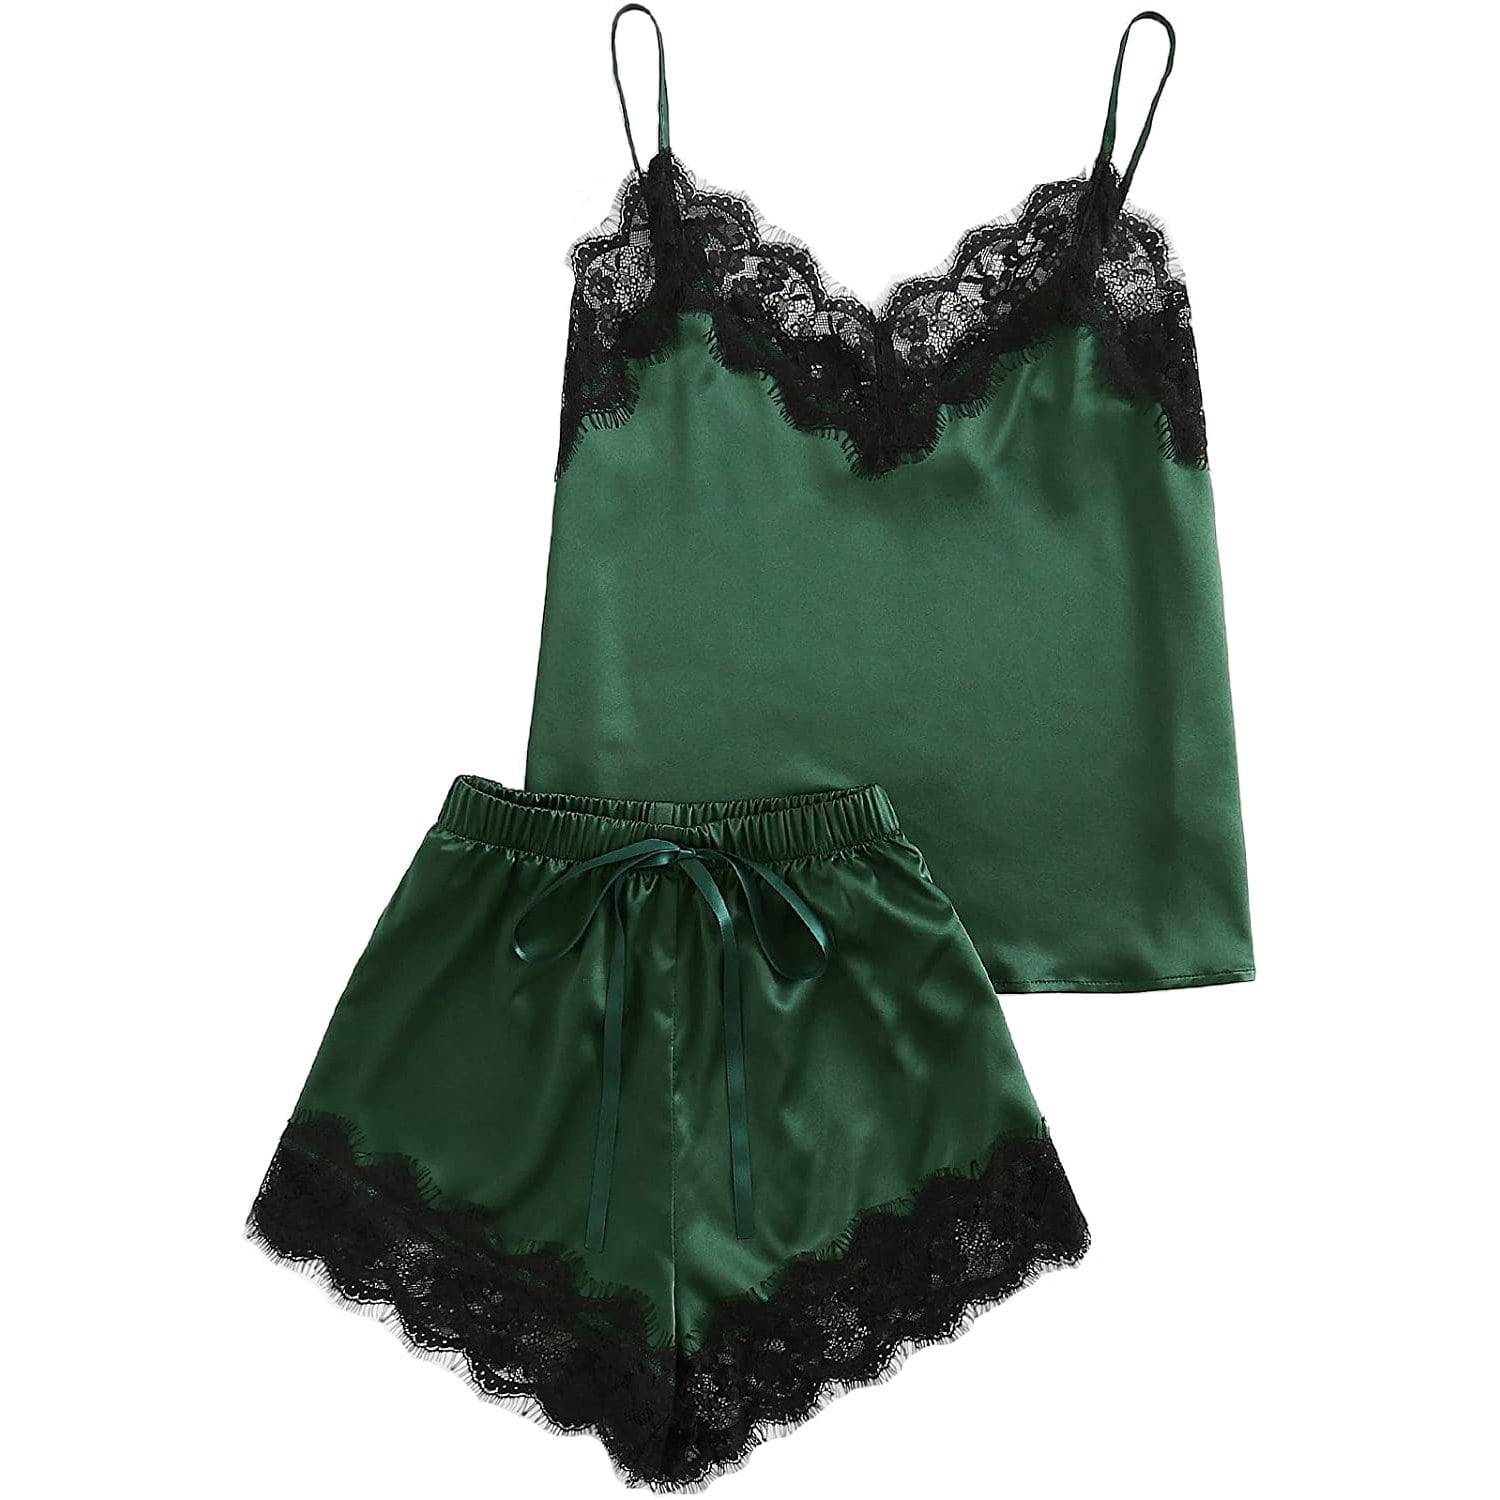 Short Silk Pajamas For Women With lace Cami Top and Shorts Pajama Set